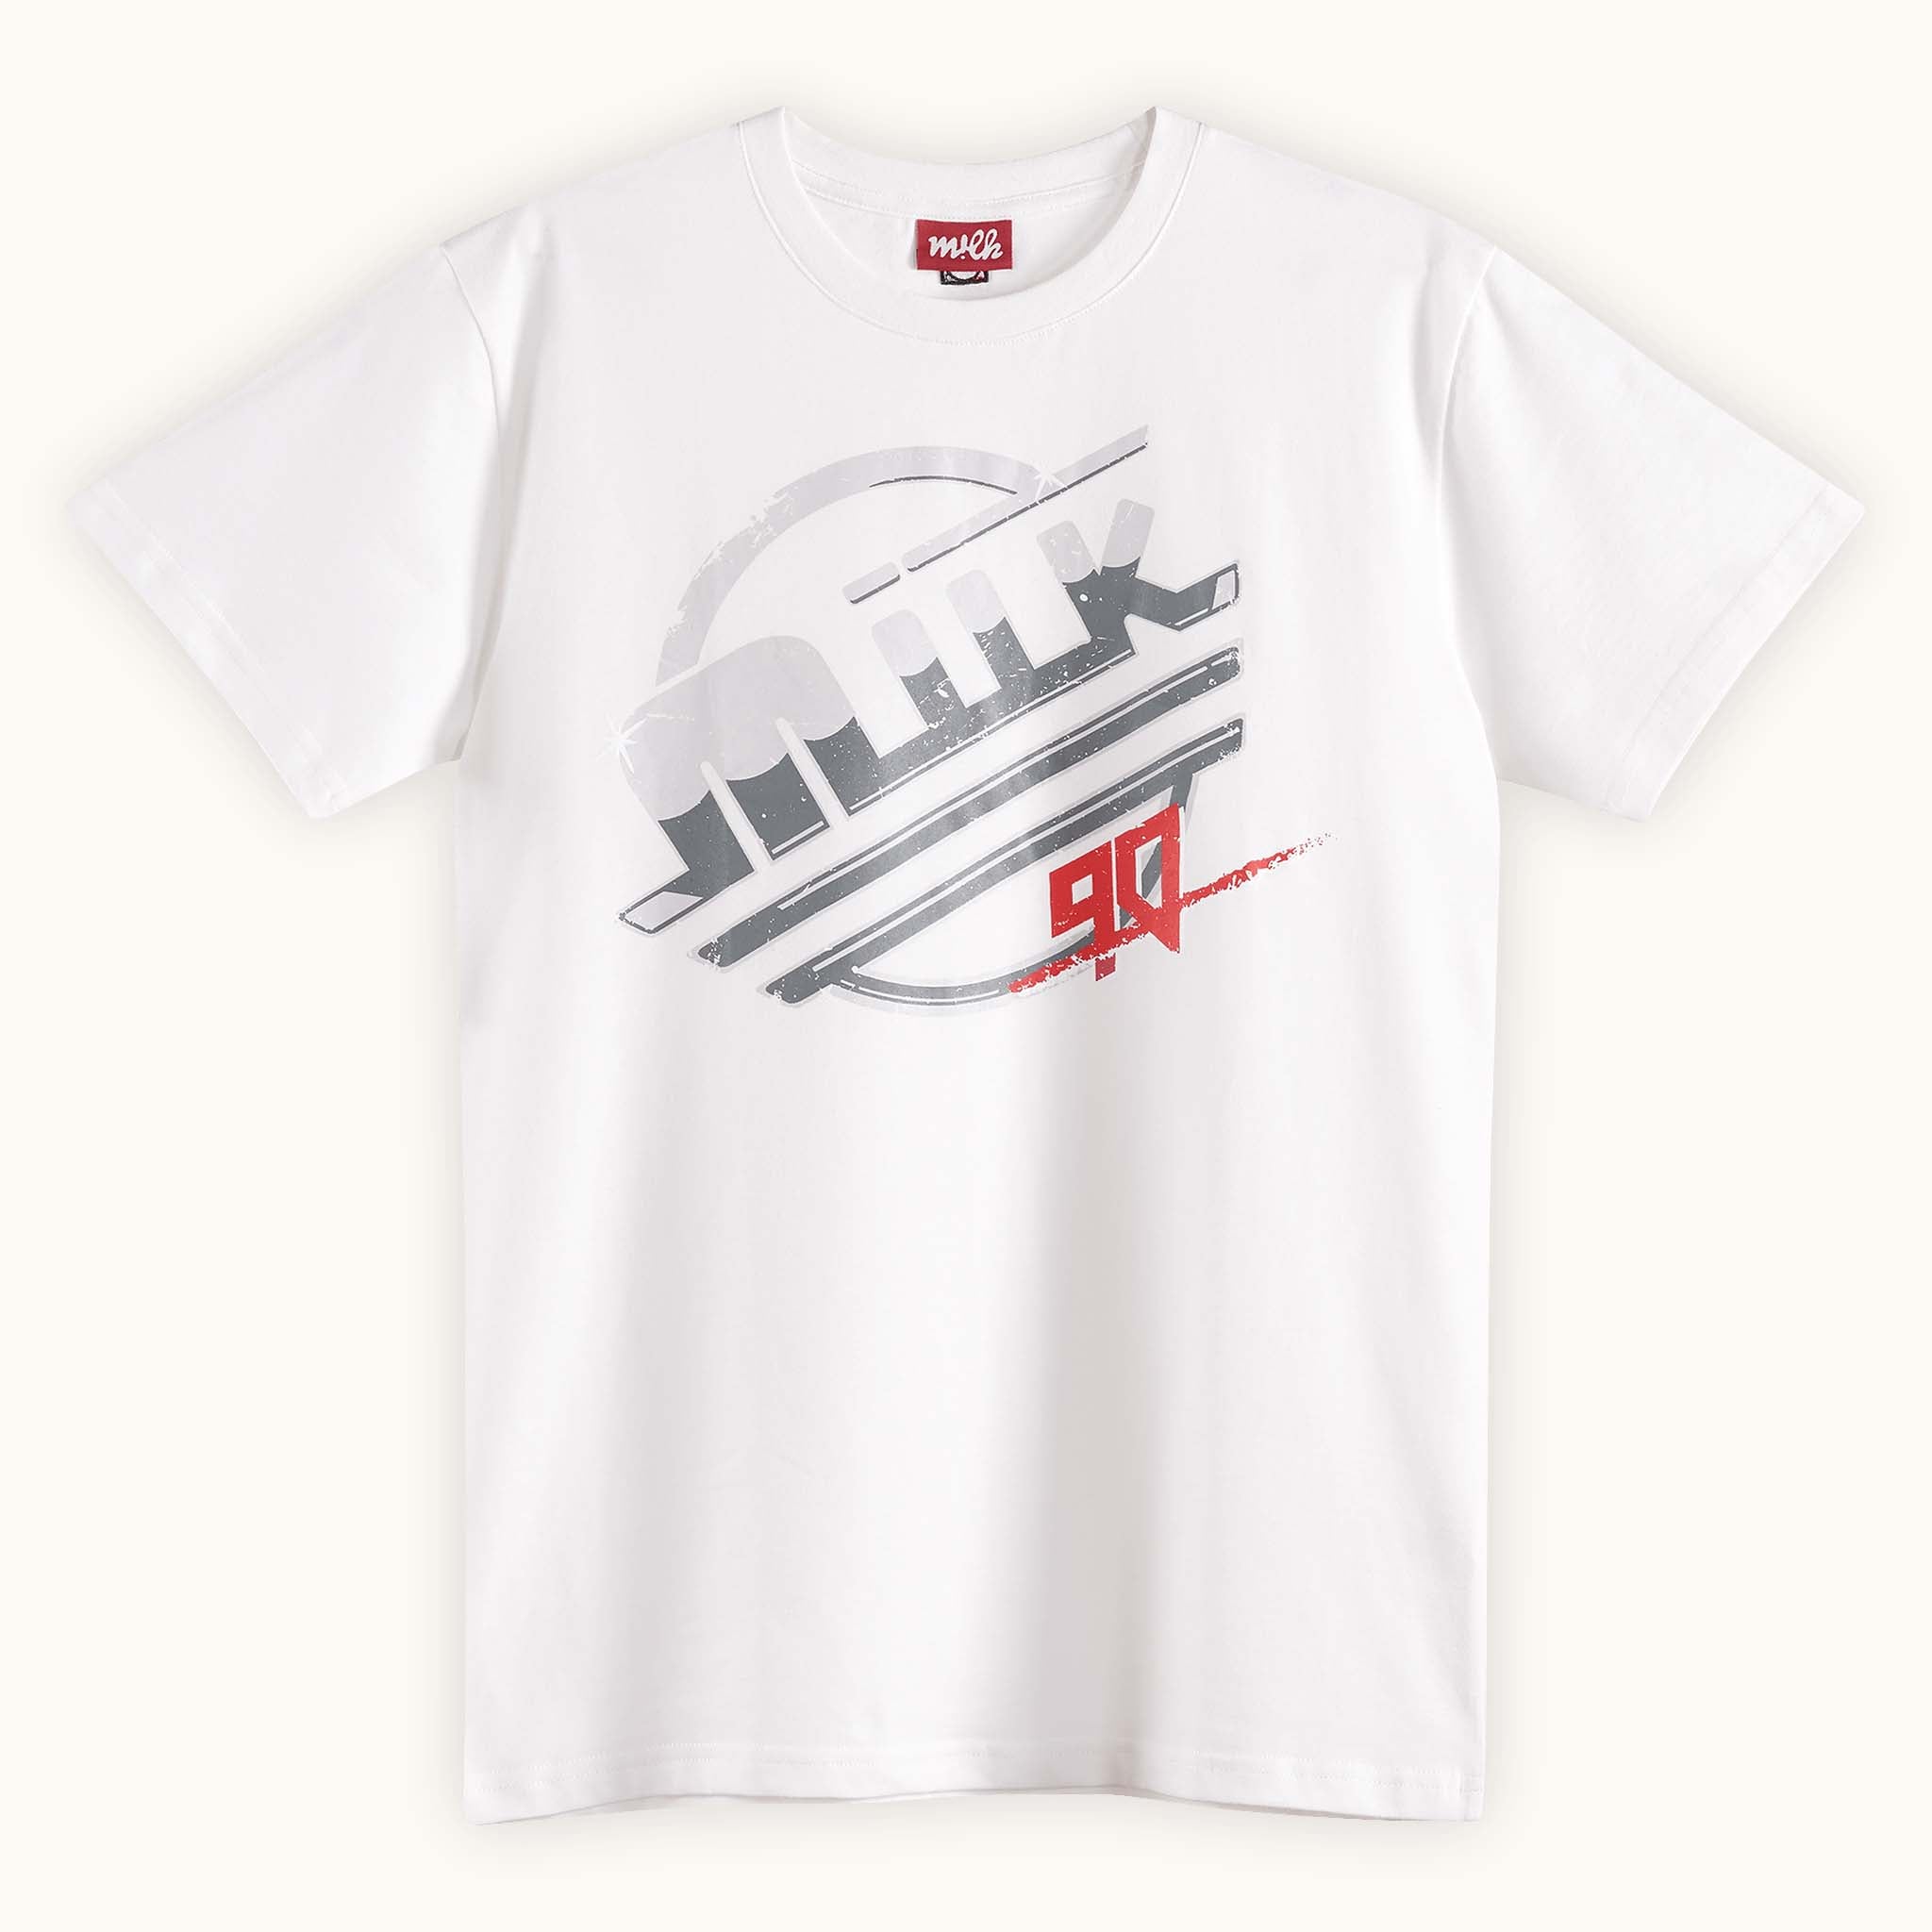 white vintage style graphic t-shirt